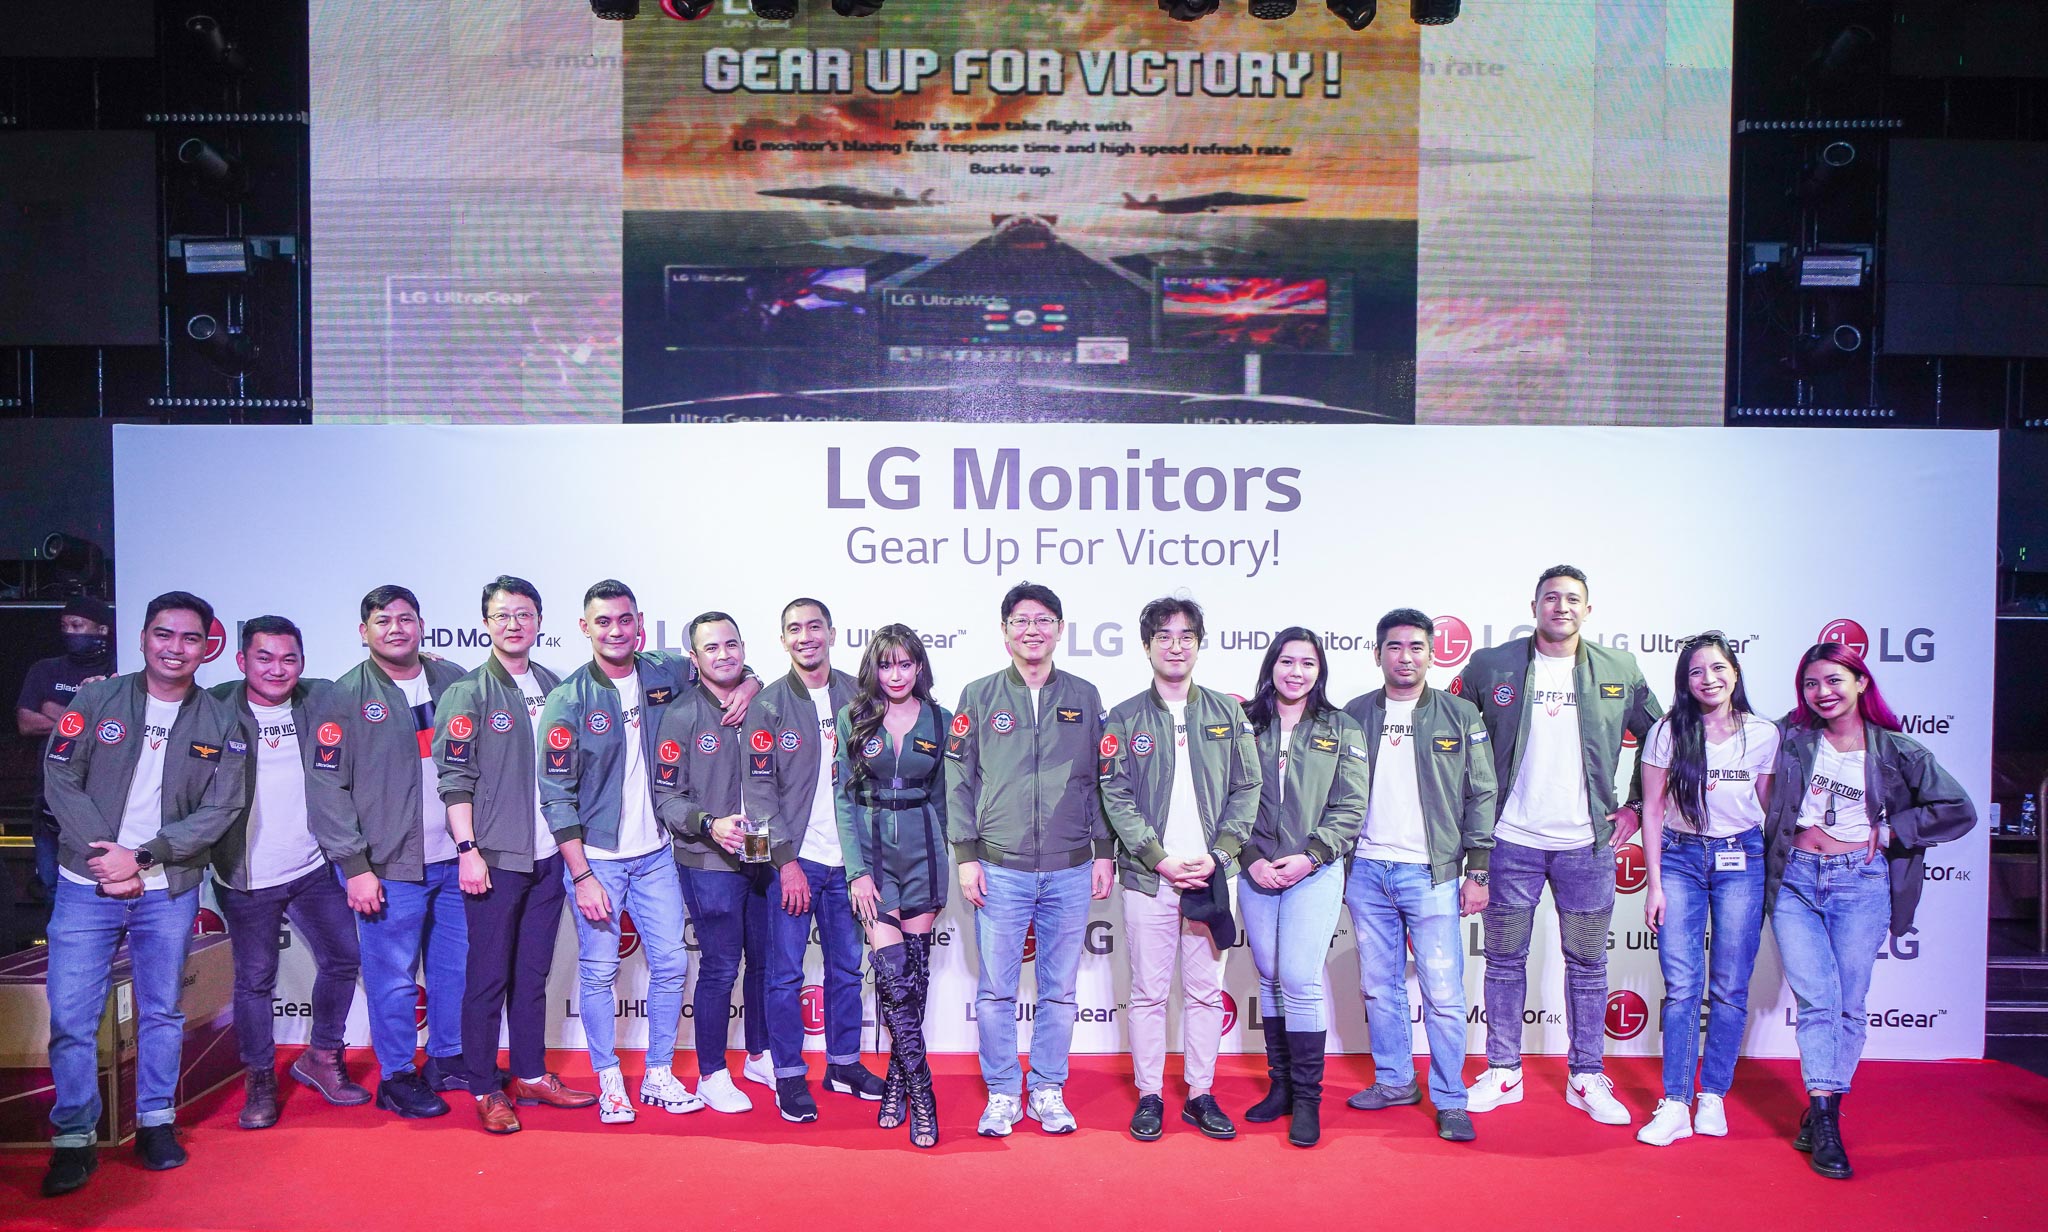 LG #GearUpForVictory with its New Line of Monitors